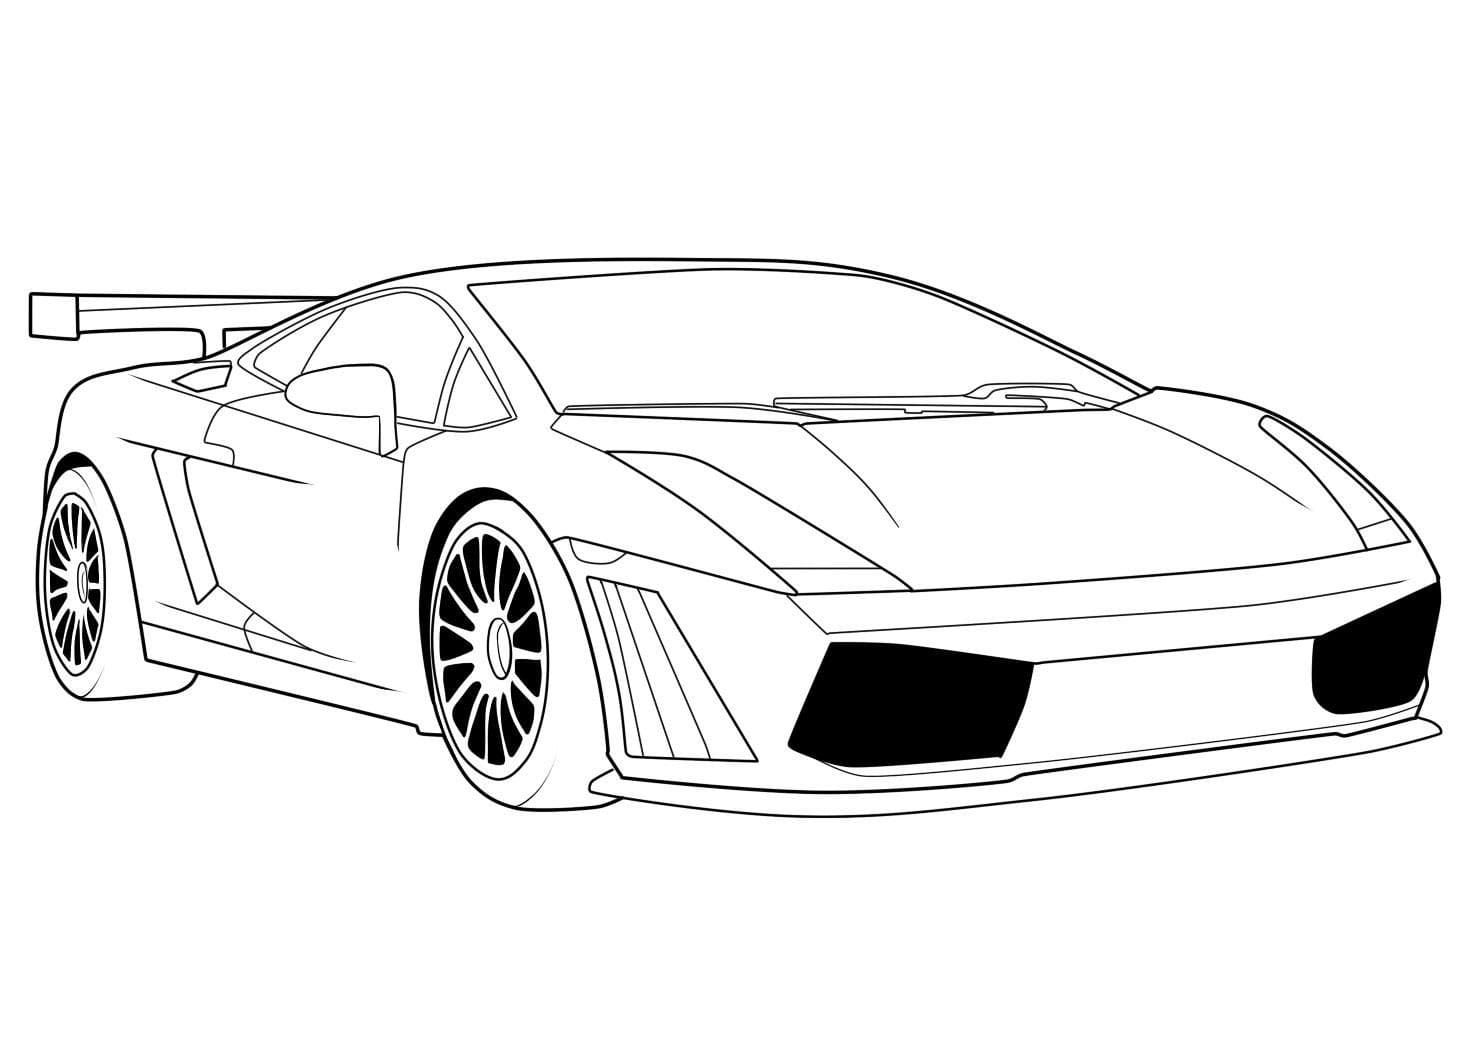 How To Find Free Lamborghini For Children Coloring Page